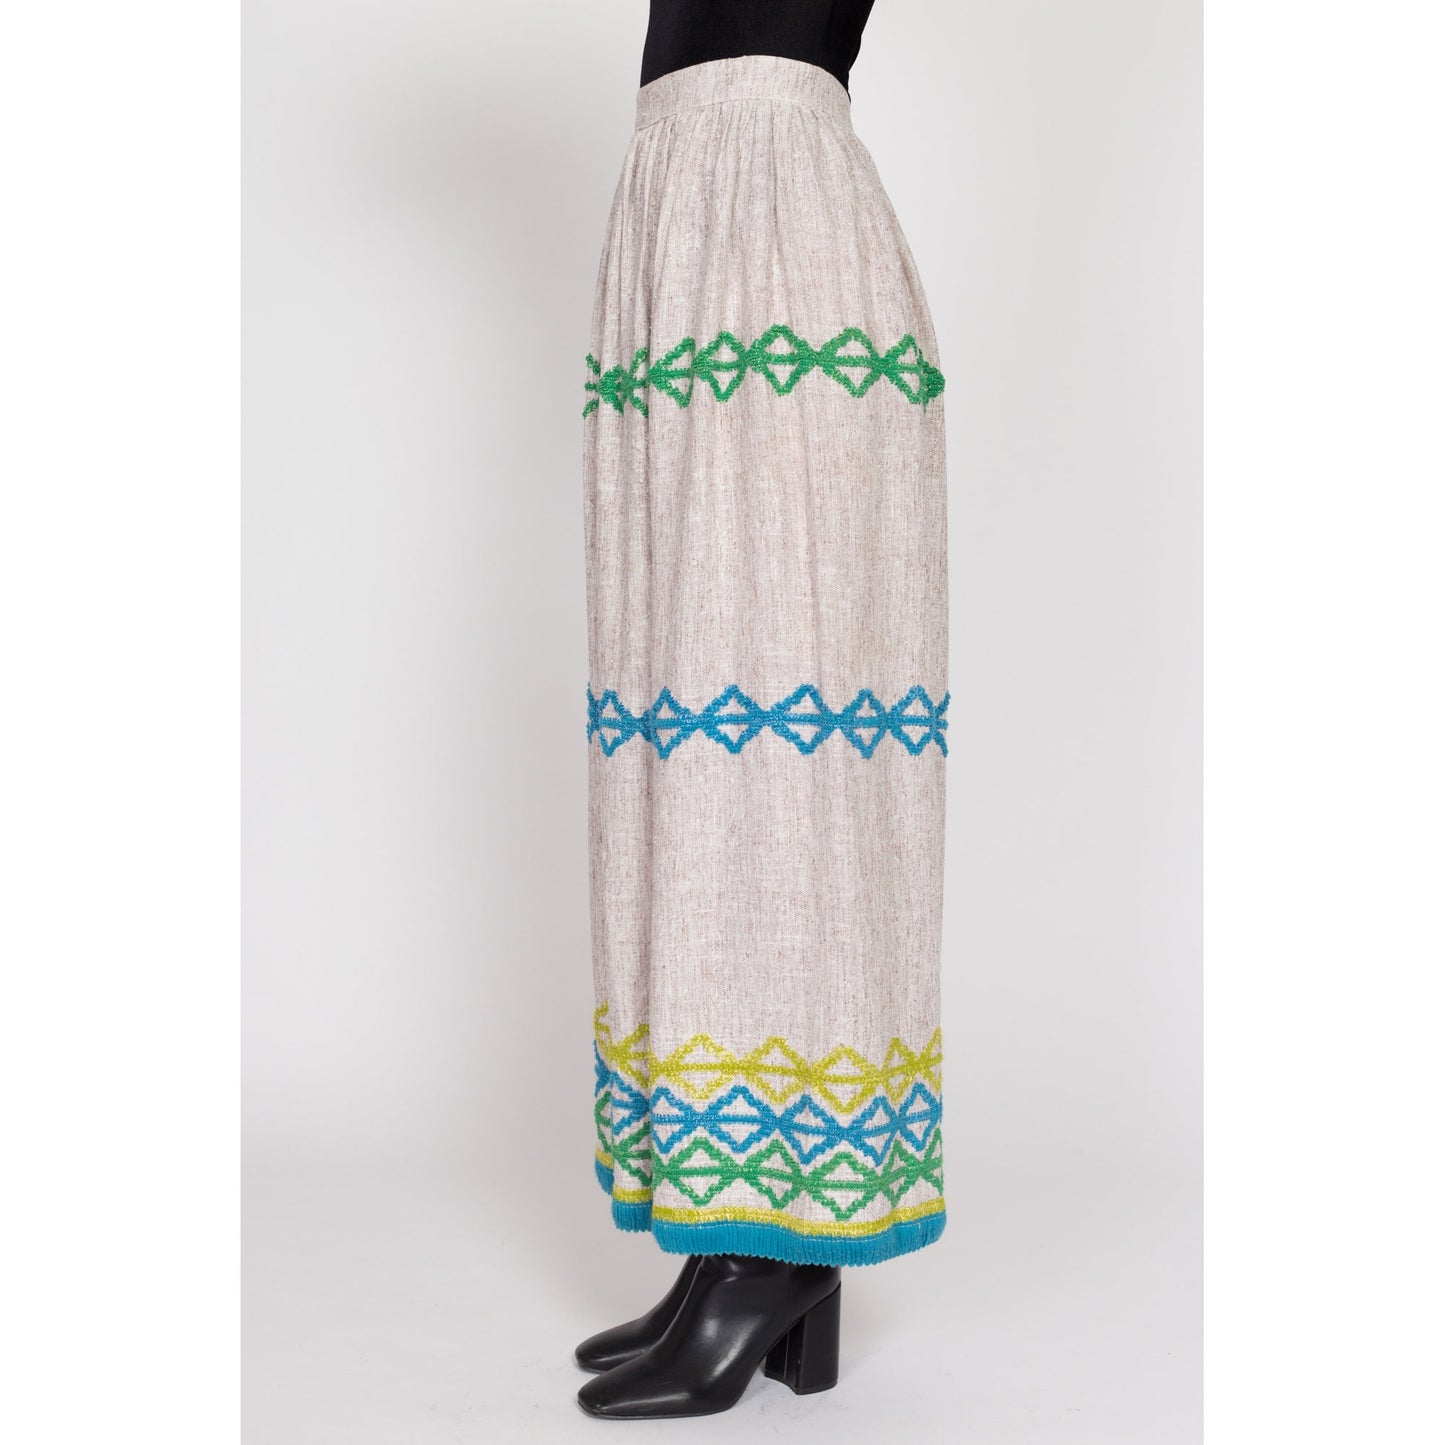 XS 70s Boho Embroidered Woven Maxi Skirt 24.5" | Vintage Striped A Line Long Hippie Hostess Skirt